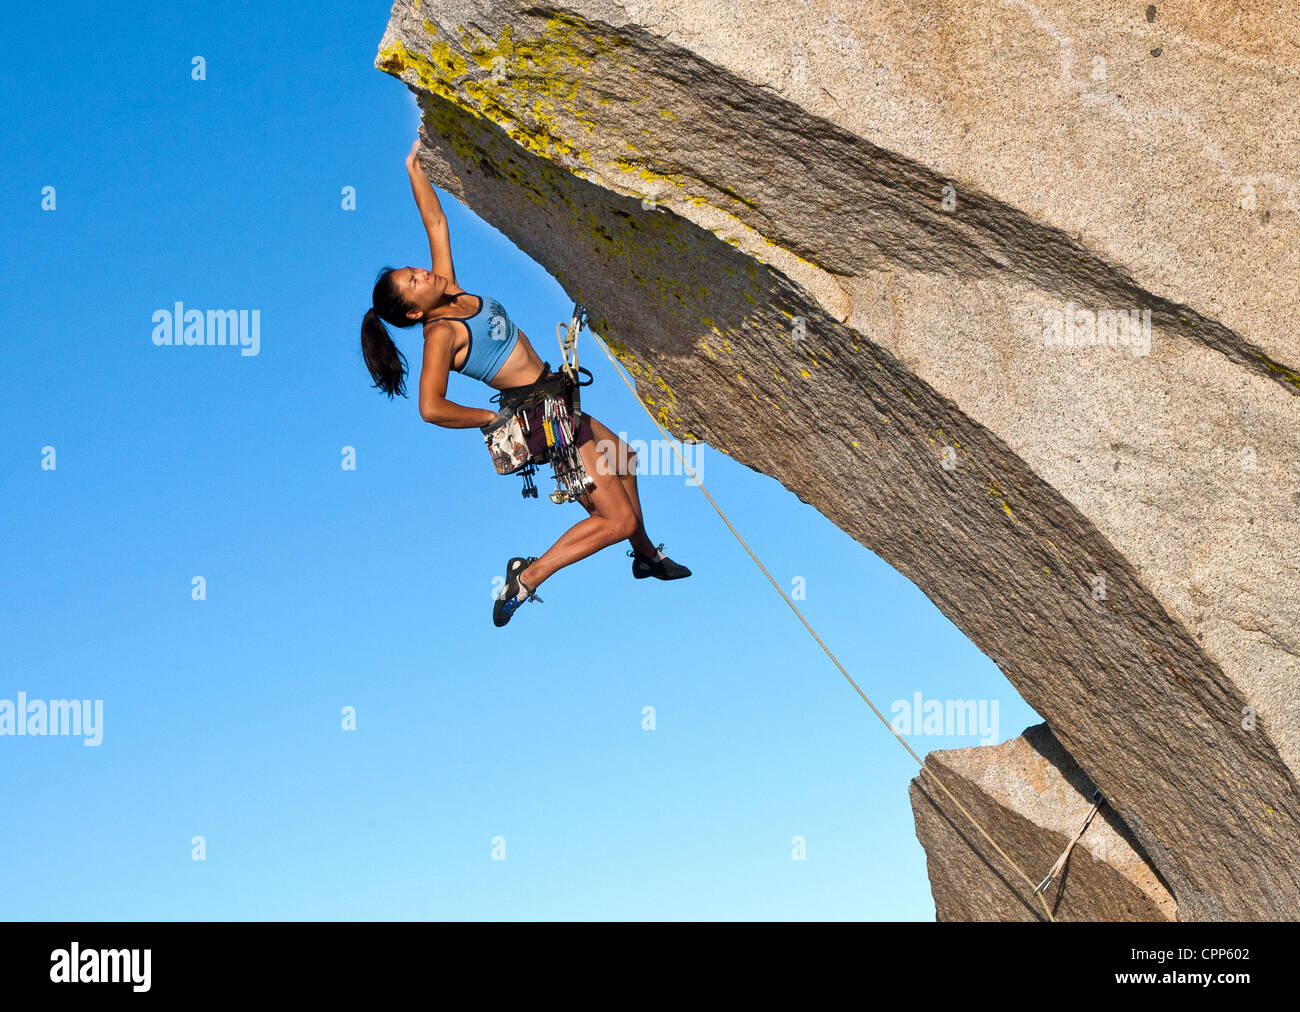 Female rock climber struggles to grip the edge of a challenging overhang. Stock Photo